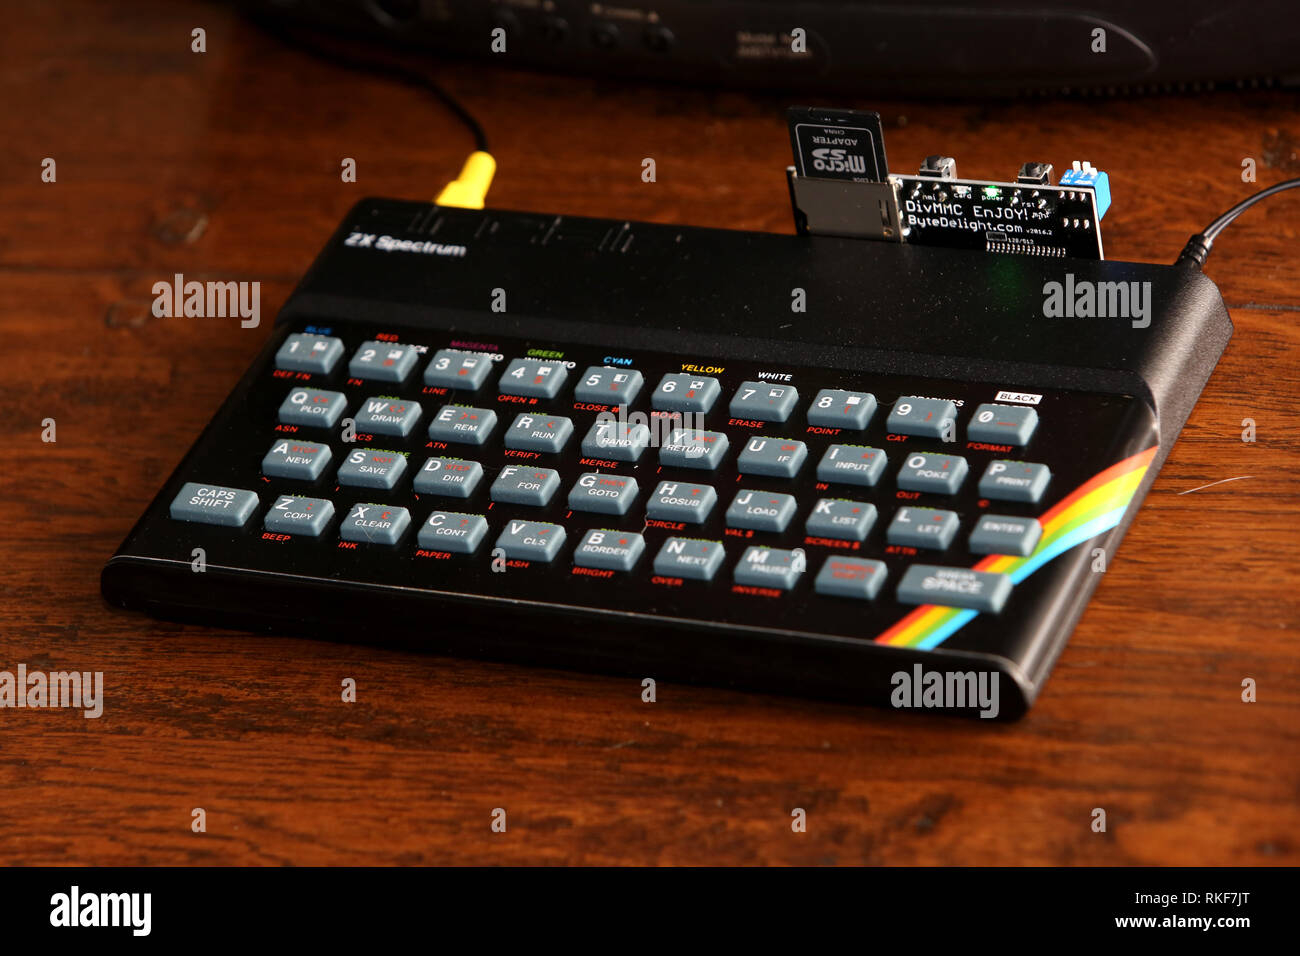 General view of a retro Sinclair computer system rebuilt to play old games, UK. Stock Photo